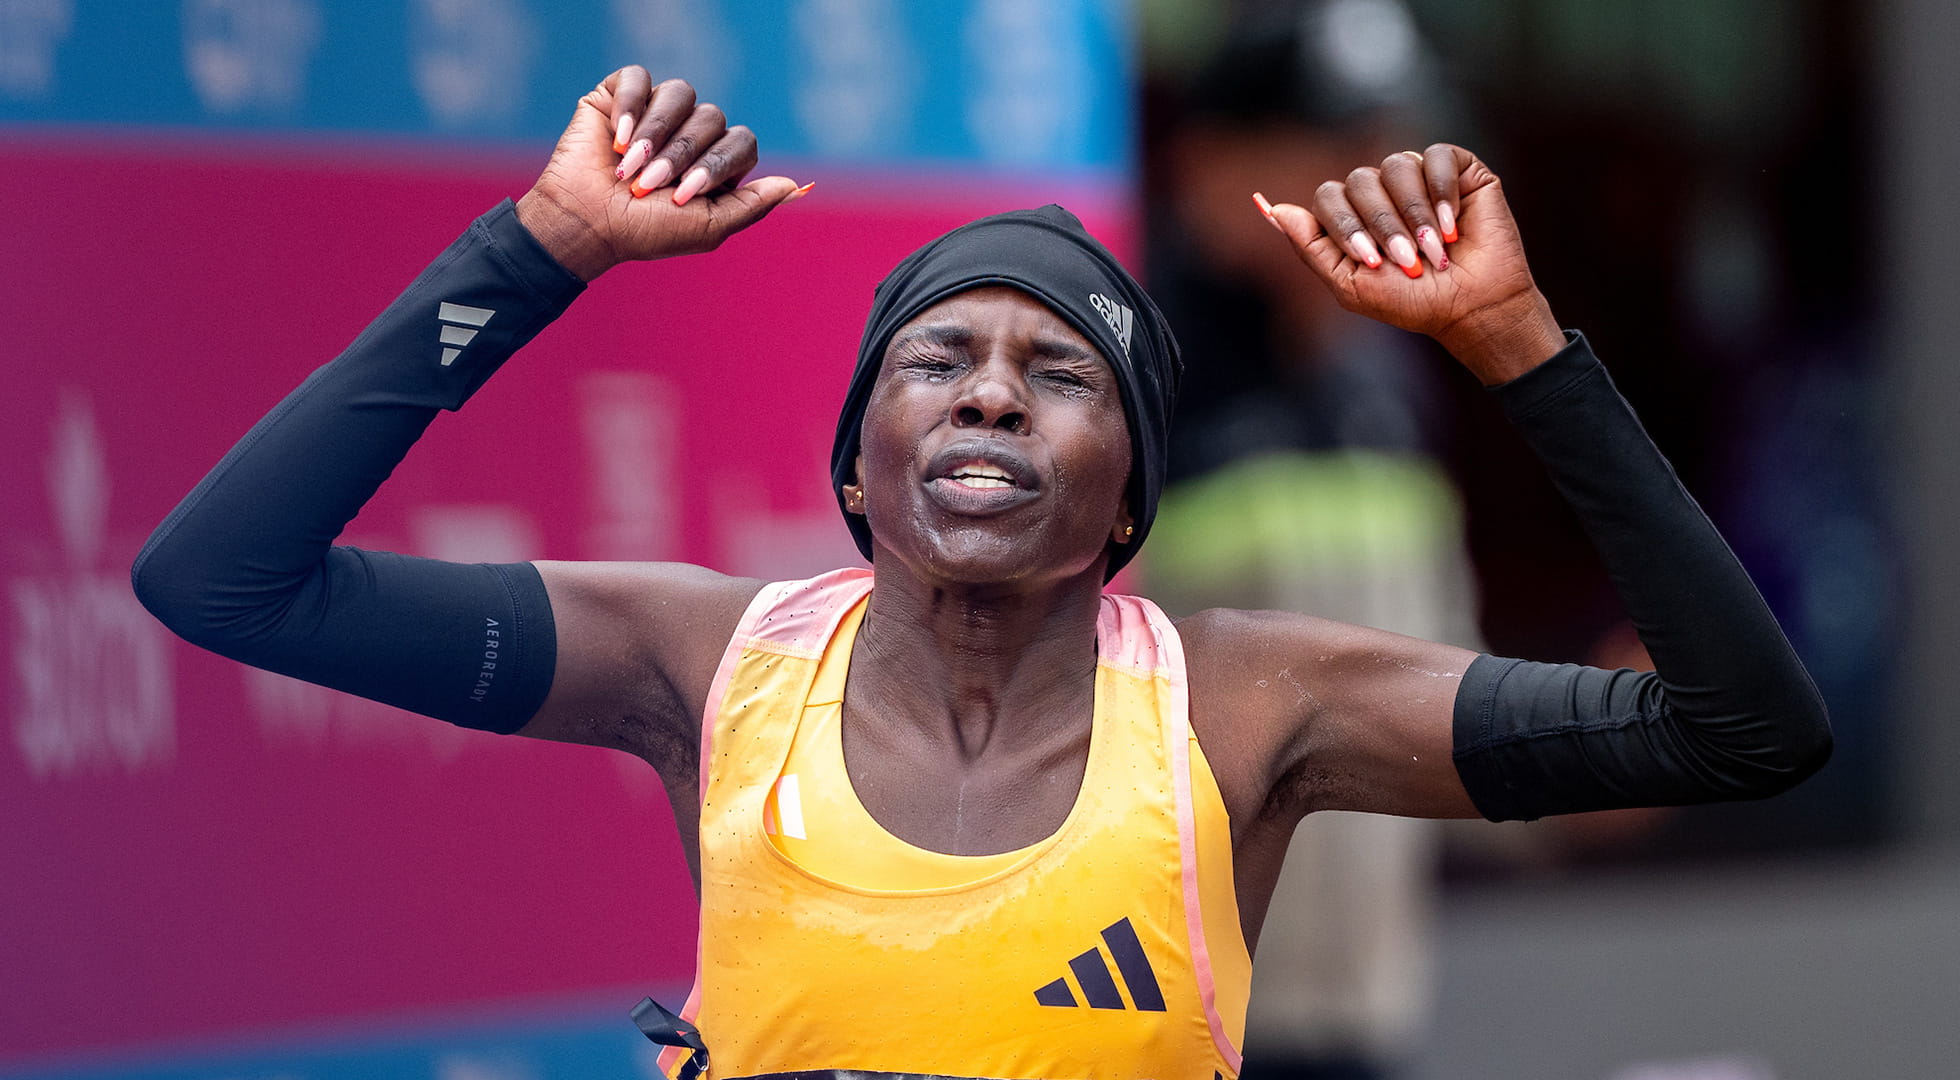 Peres Jepchirchir (ETH) celebrates as she crosses the finish line on The Mall to the win the Elite Women’s Race